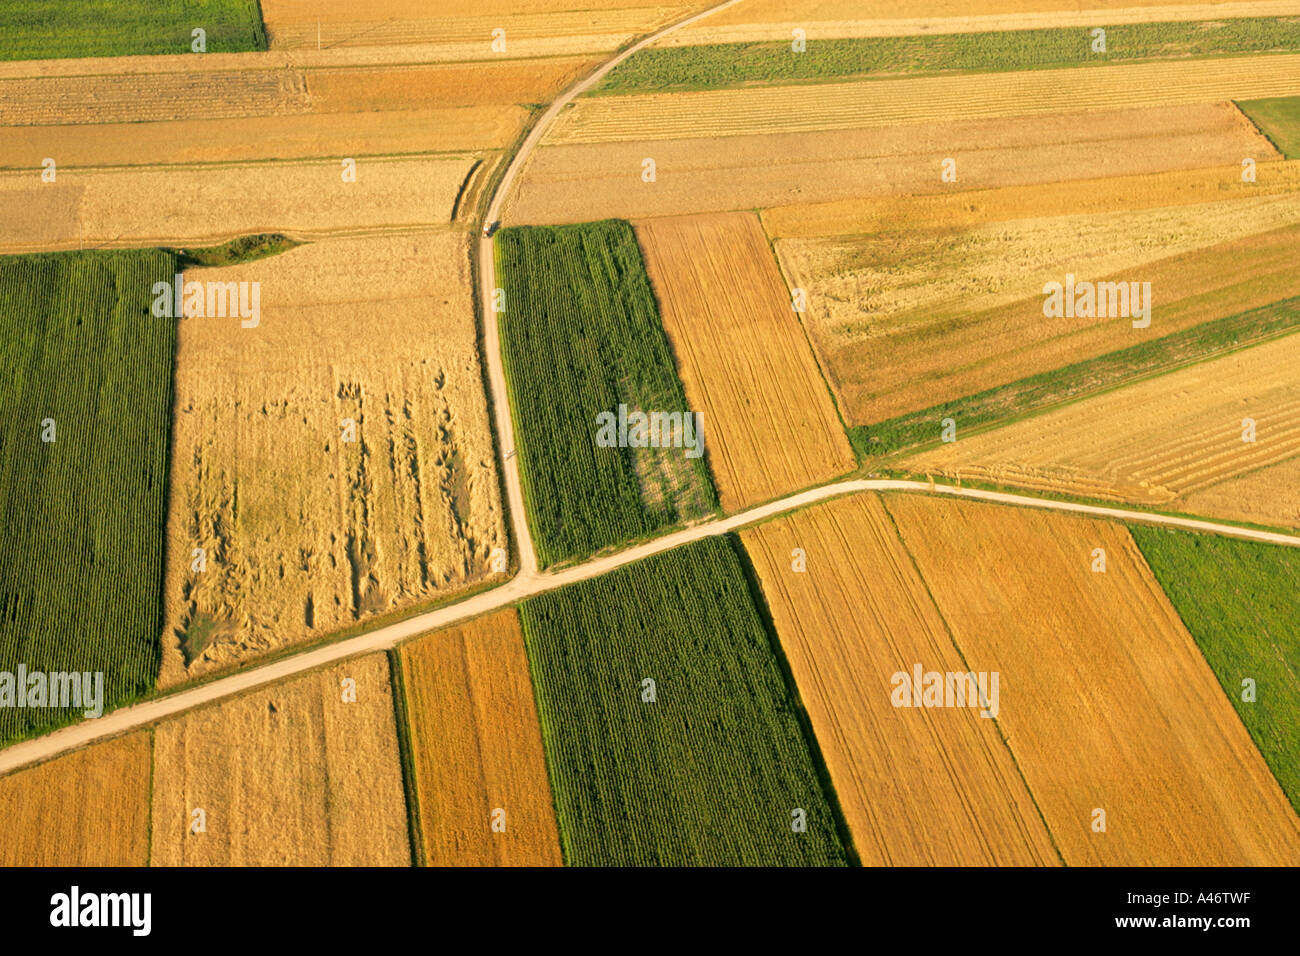 Agrarian country Stock Photo